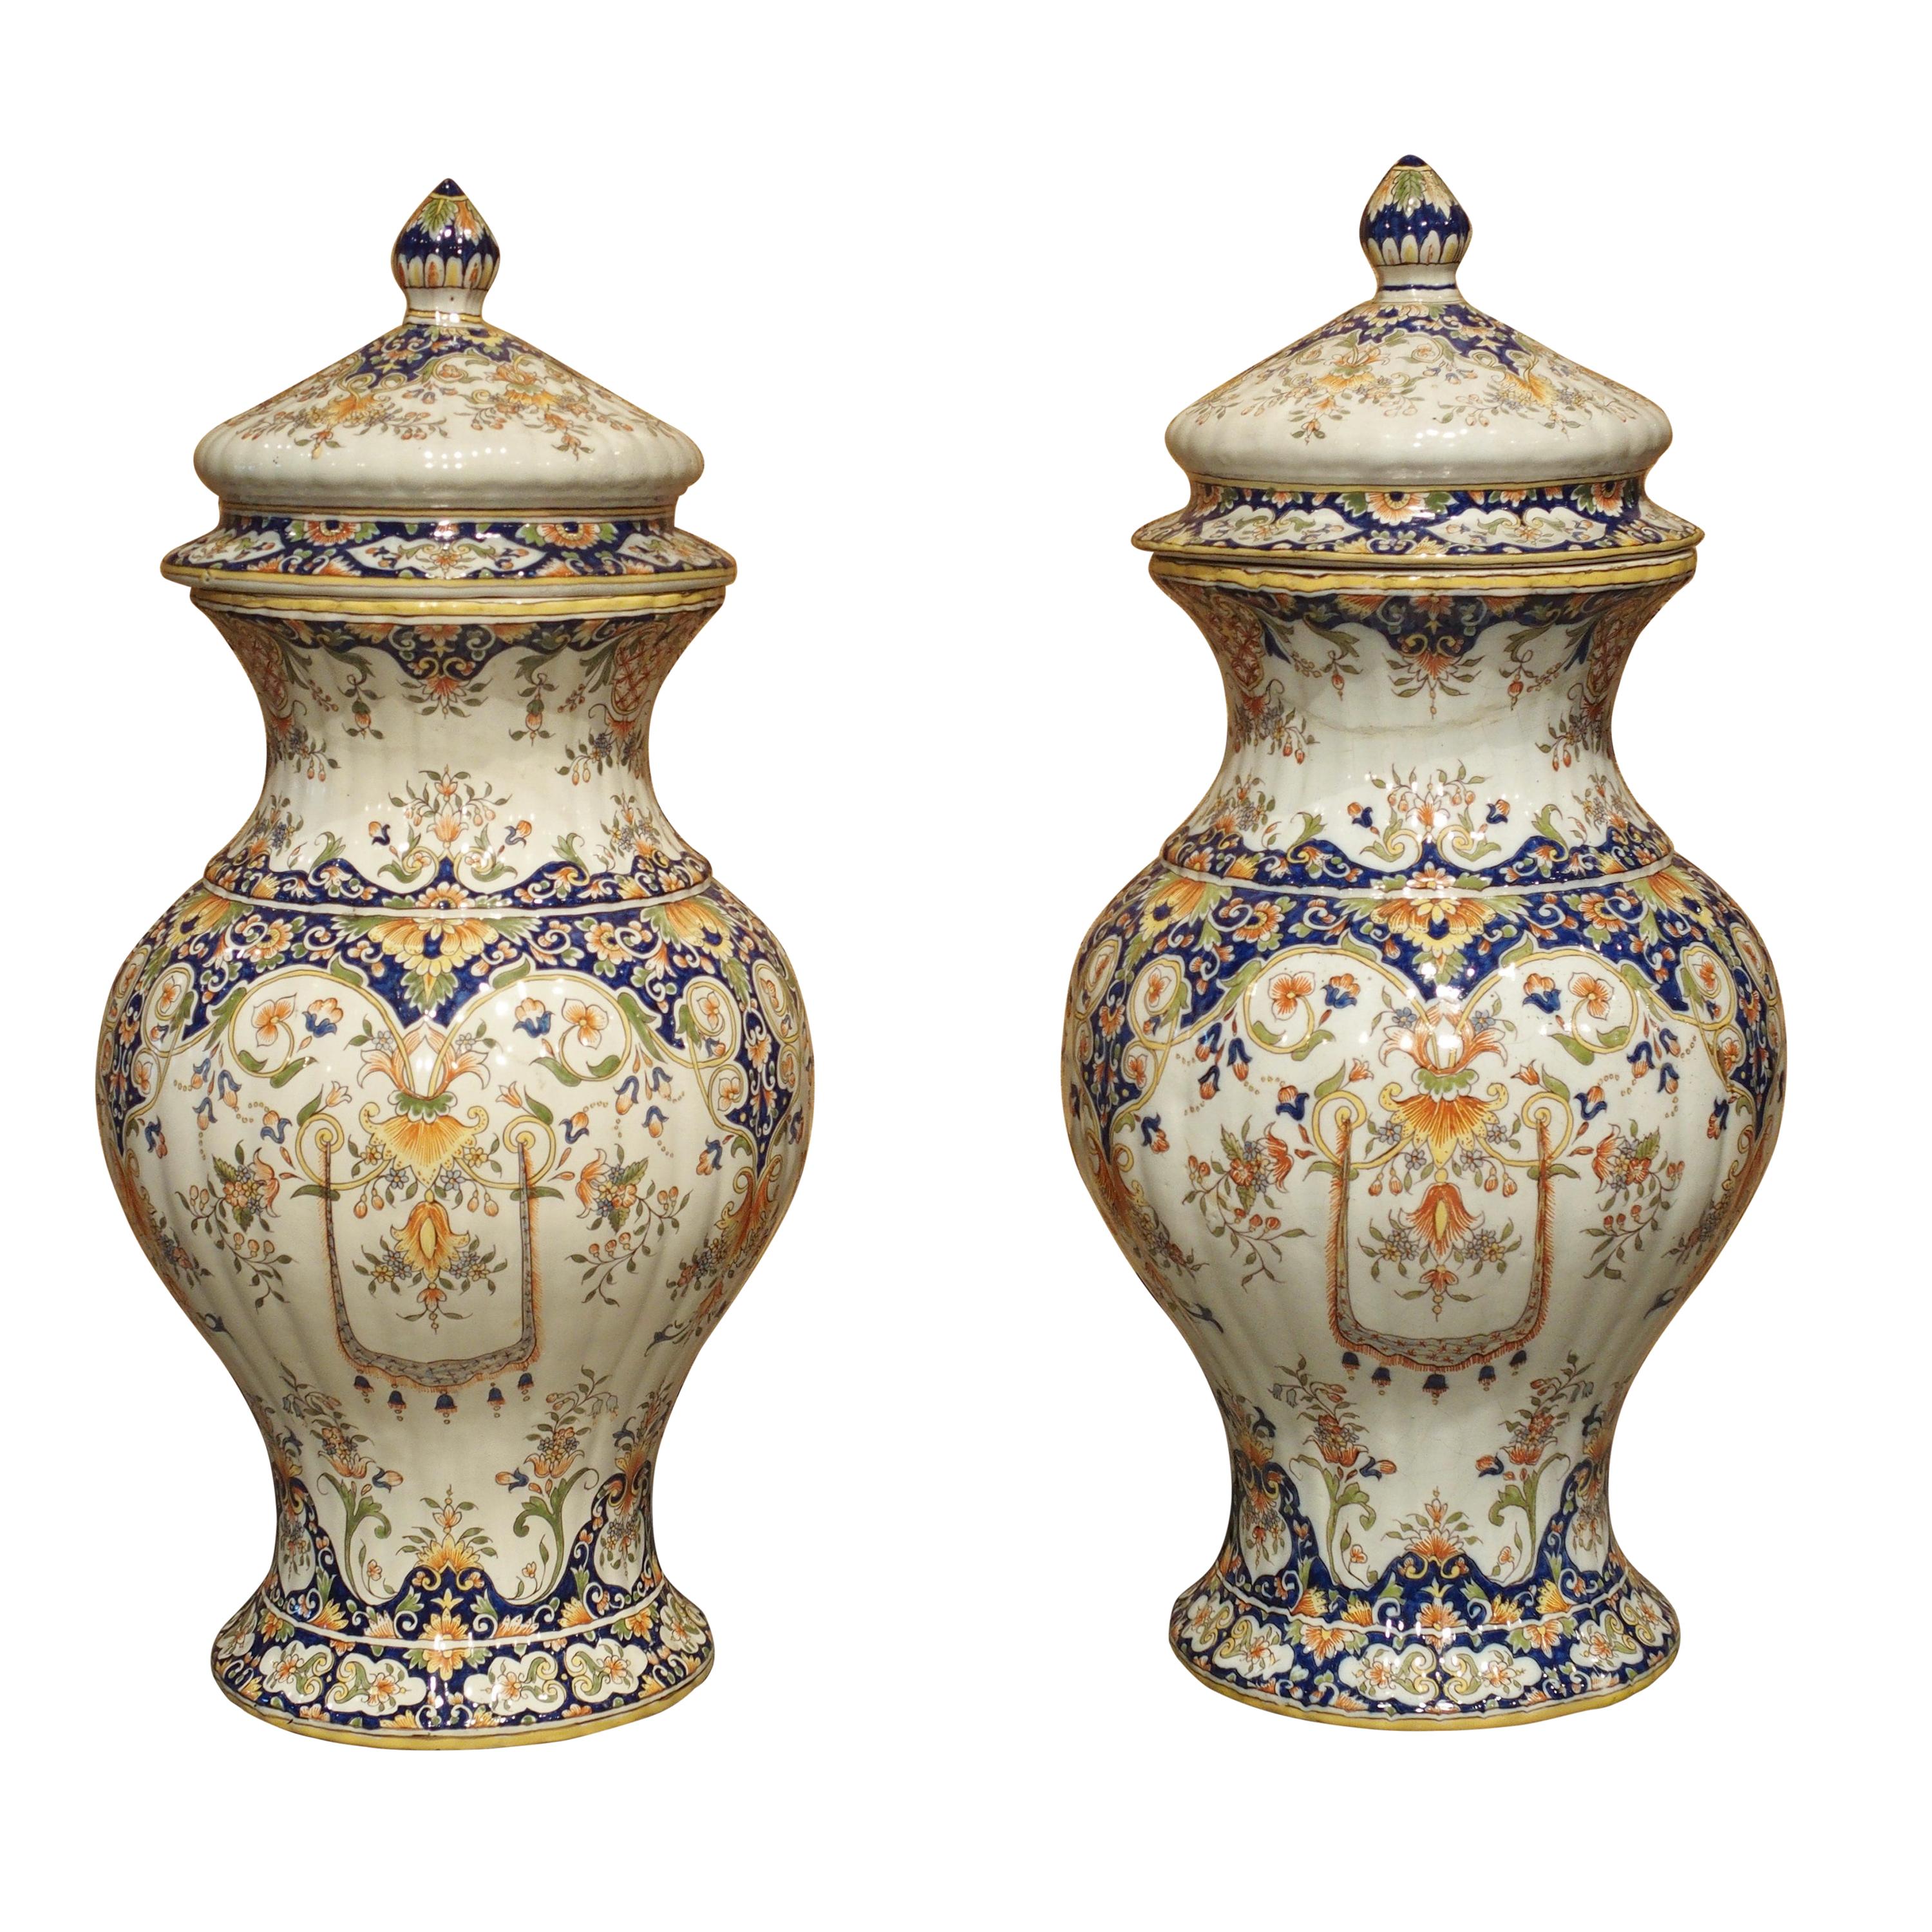 Pair of Antique Faience Lidded Urns from Desvres, France, Circa 1880